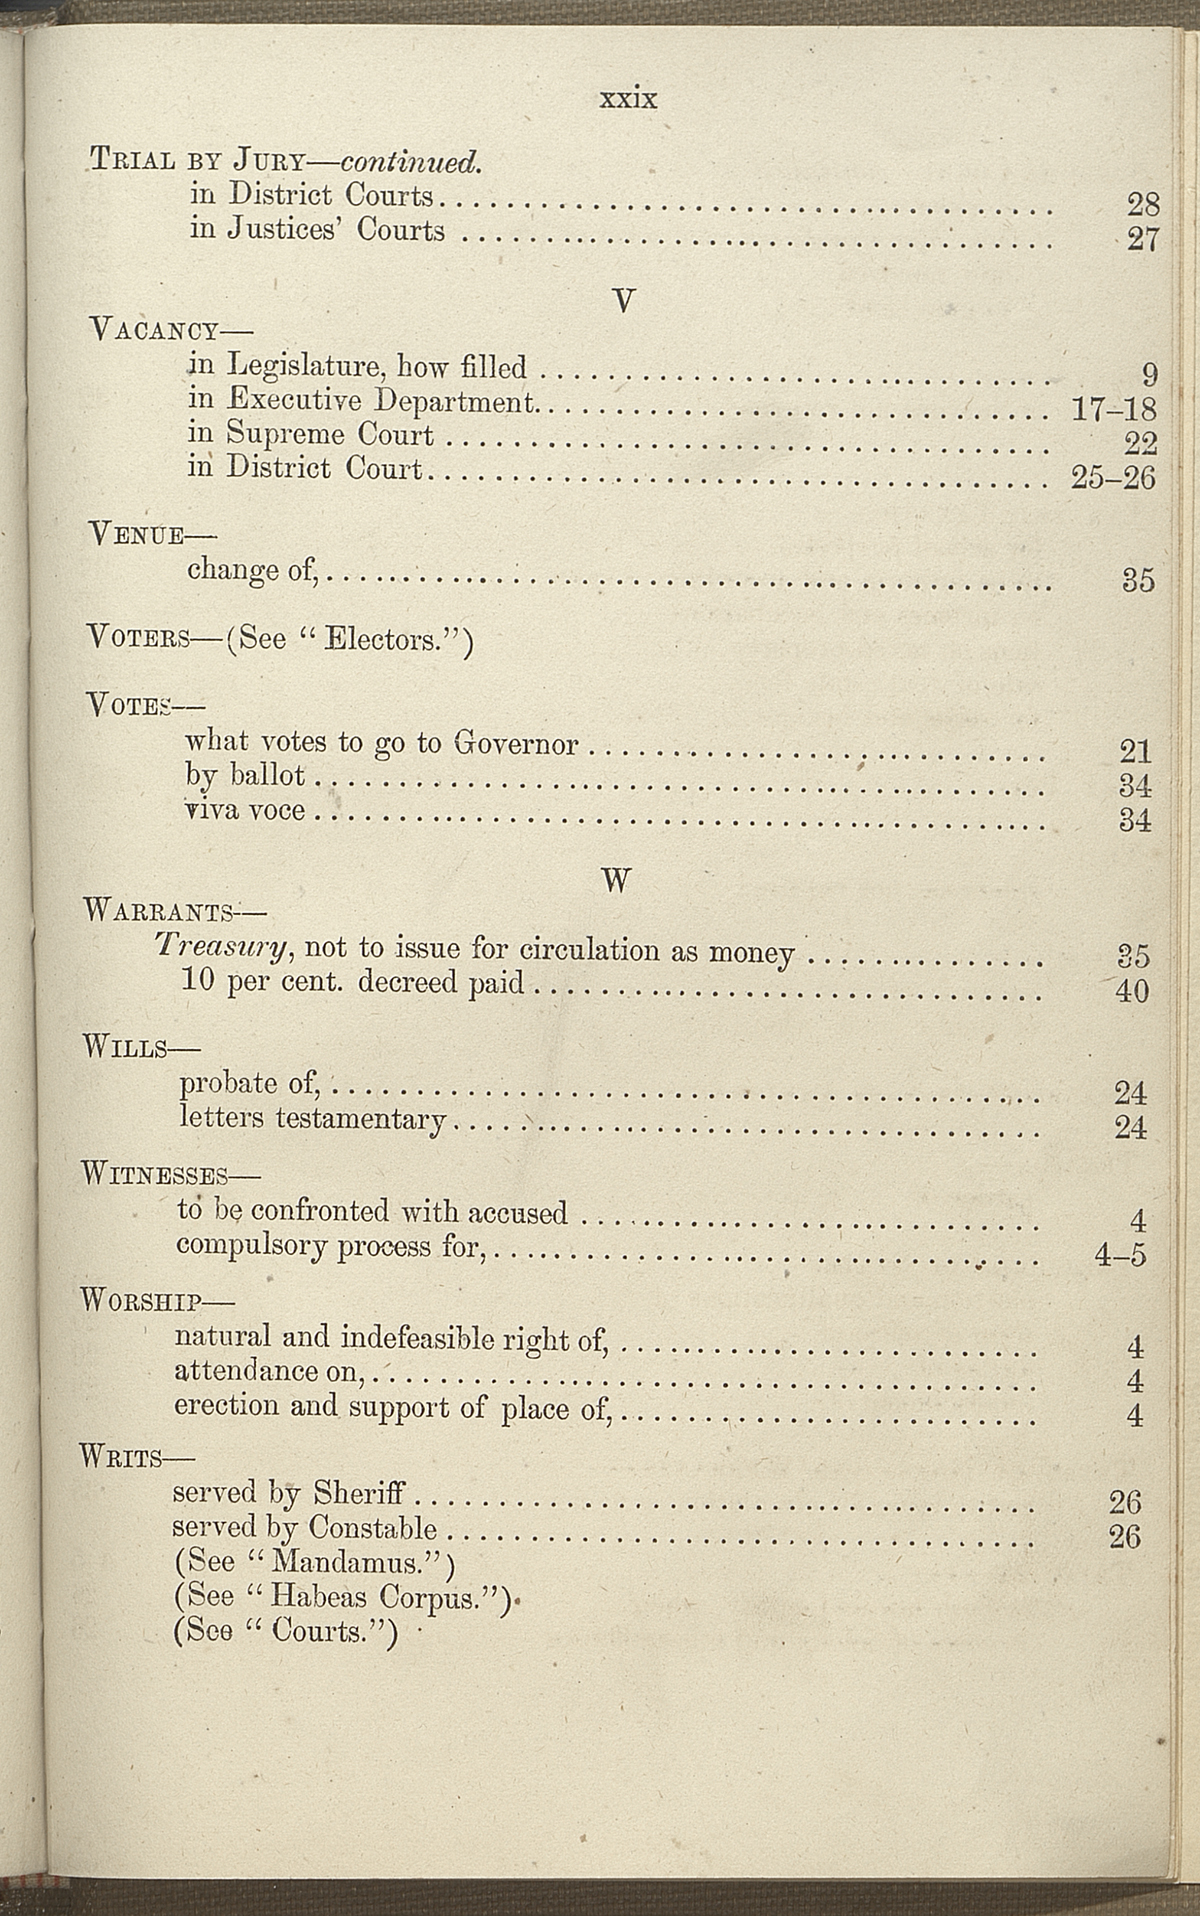 page 29 - 1869 index